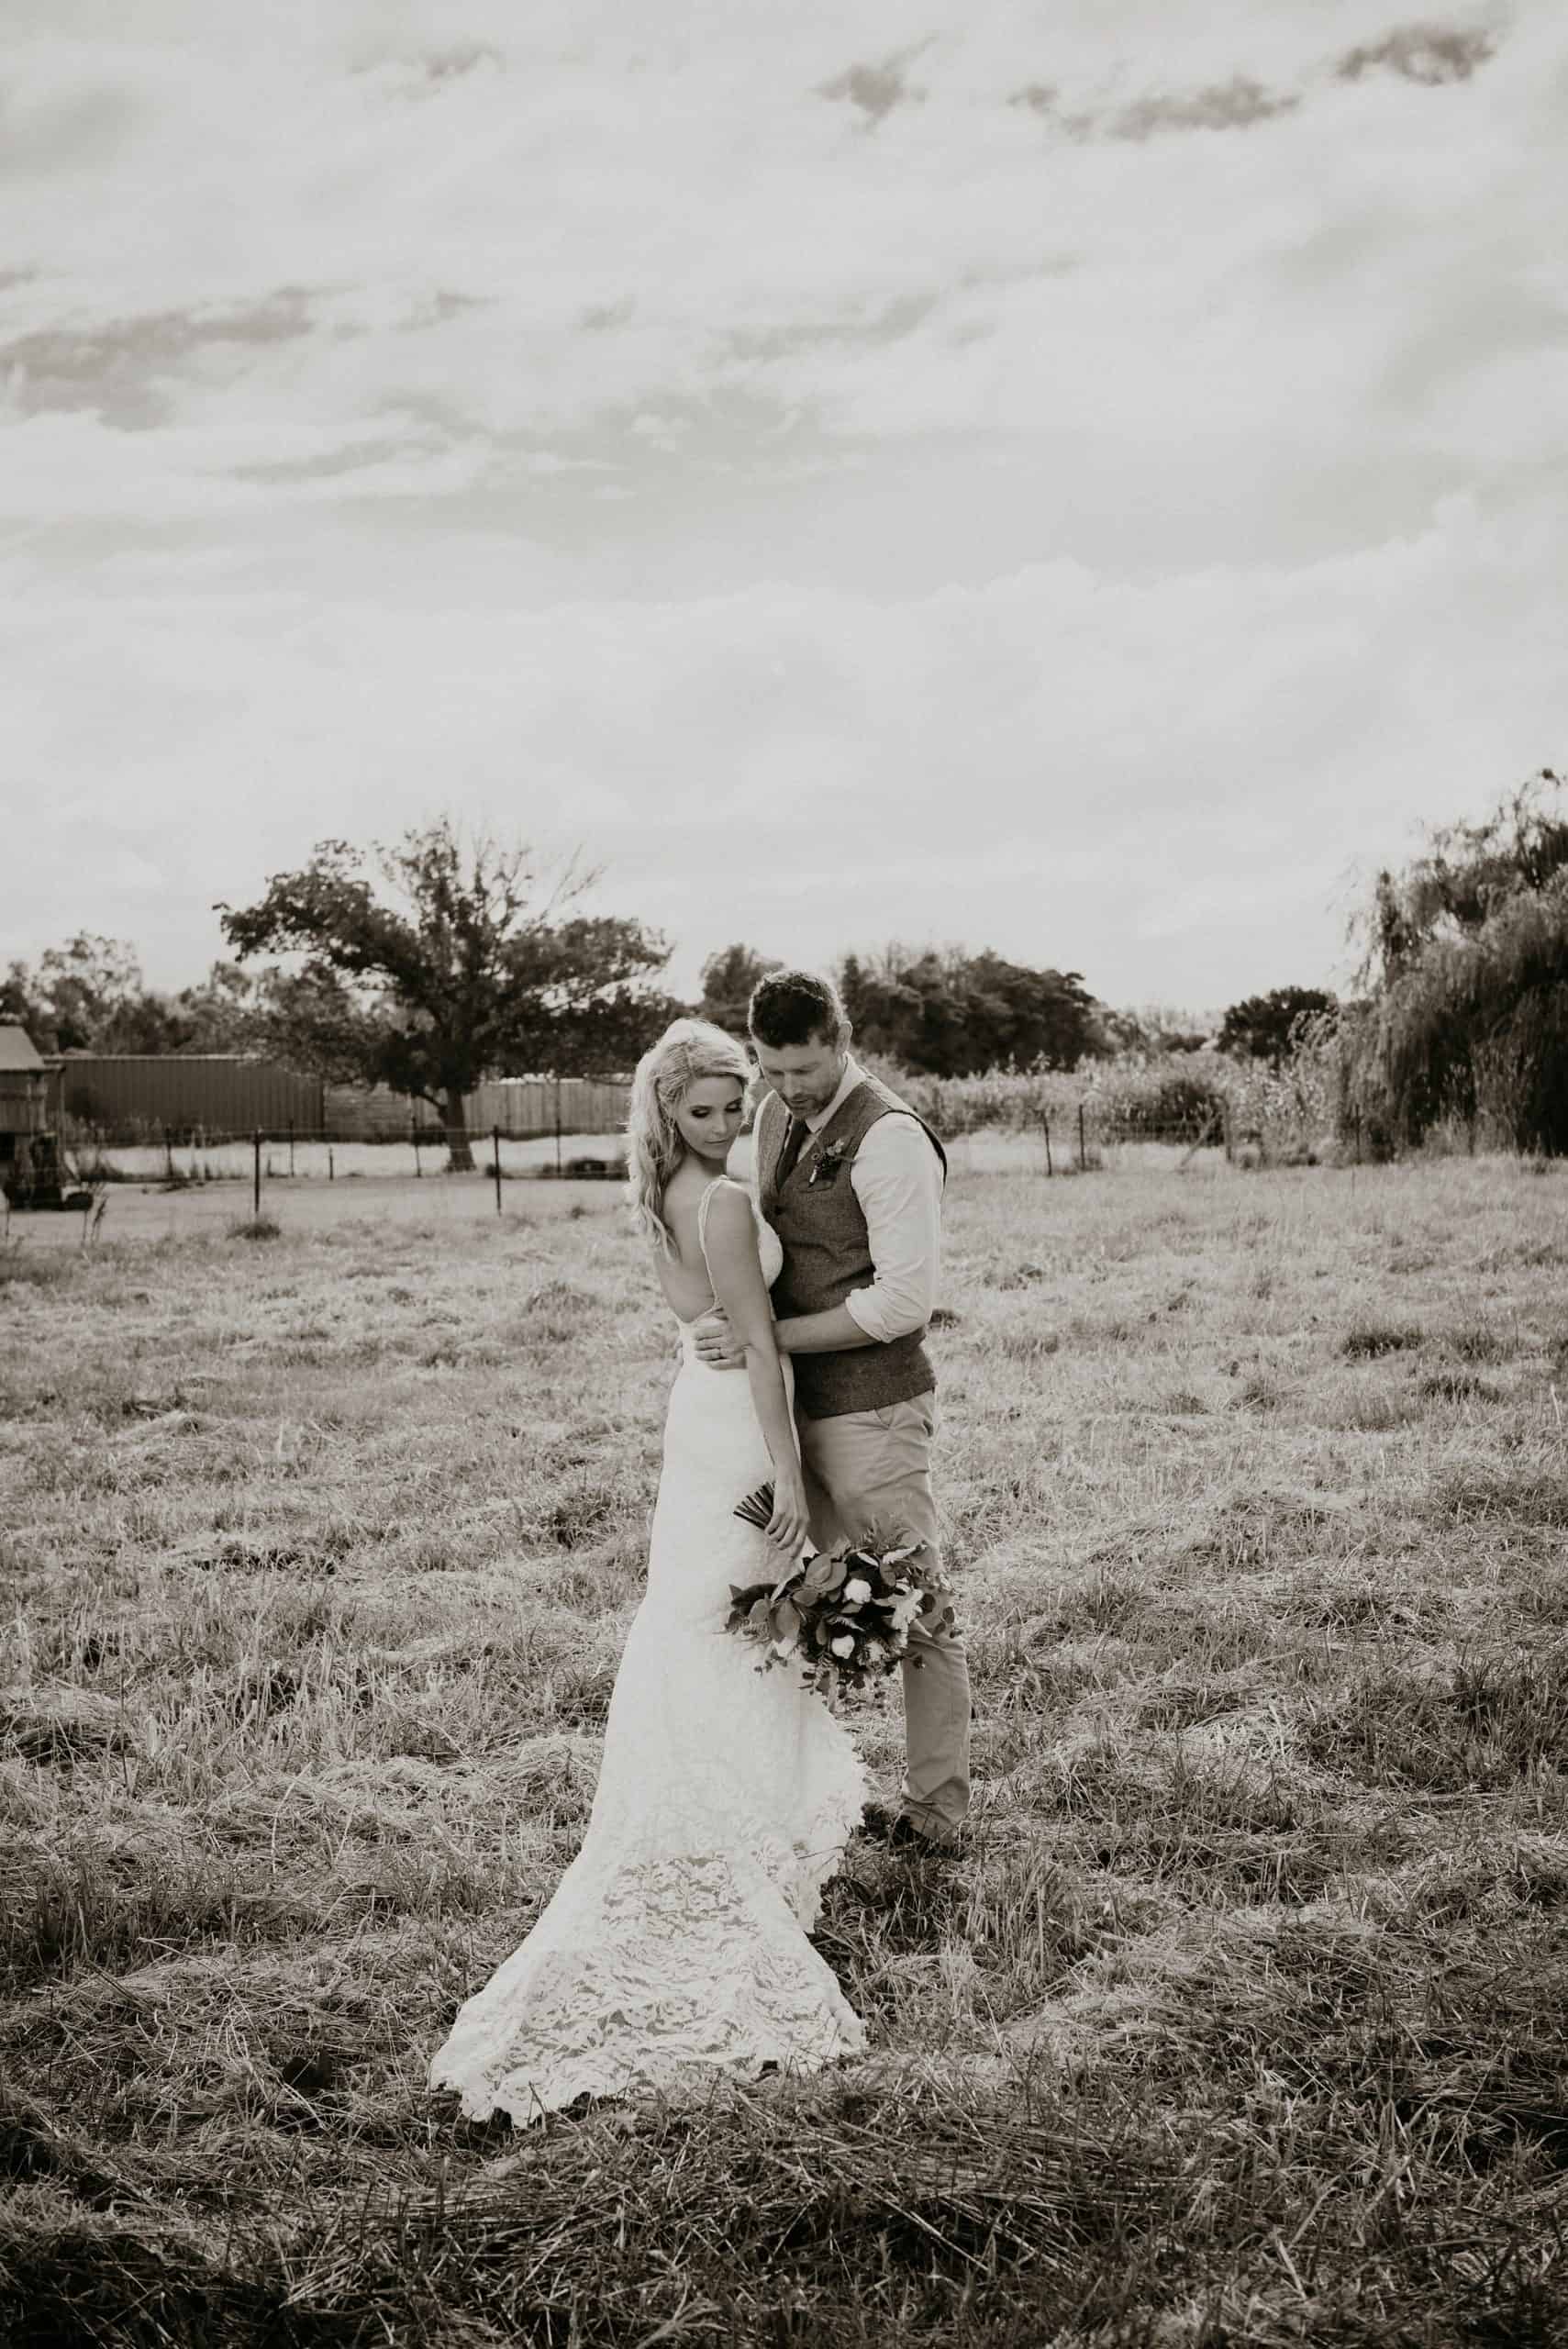 Couple hug in field during elopement photography photo session after their intimate wedding ceremony eloping at home farm property with Let's Elope Melbourne Celebrant Photographer Elopement Package Victoria Sarah Matler Photography